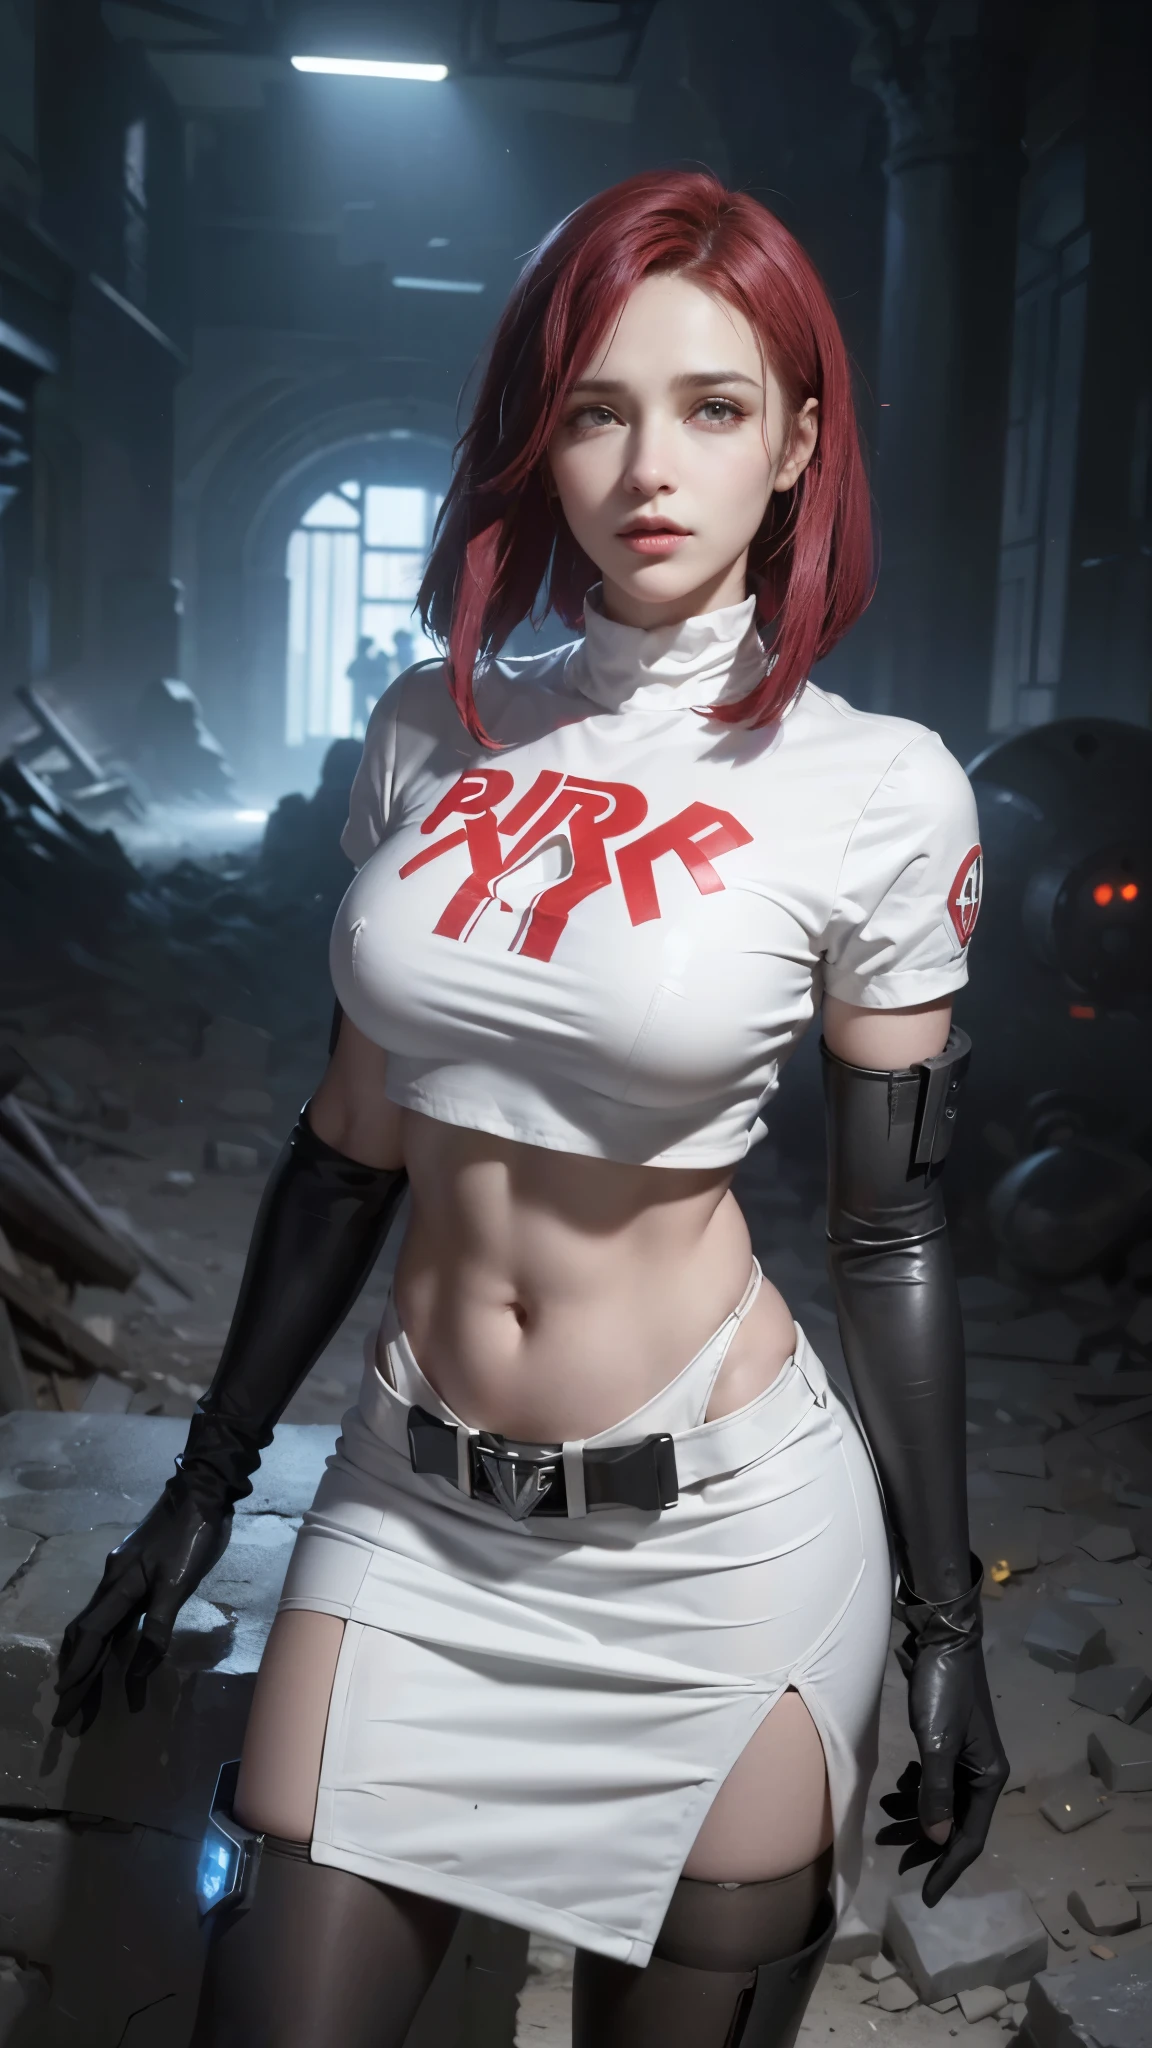 (La Best Quality,A high resolution,Ultra - detailed,actual),team rocket,(short red hair :1.4), (team rocket uniform:1.4) , red letter R, (white skirt:1.4) ,(white crop top:1.4) ,black thigh-highs, (black elbow gloves:1.4) ,,(Cyberpunk ruined dungeon ruins background :1.4 ), (team rocket uniform:1.4), (team rocket uniform V2.1), More detailed 8K.unreal engine:1.4,UHD,La Best Quality:1.4, photorealistic:1.4, skin texture:1.4, Masterpiece:1.8,first work, Best Quality,object object], (detailed face features:1.3),(The correct proportions),(Beautiful blue eyes),  (dynamic cowboy pose), (perfect anatomy :1.4), (bright colors), ,(Cyberpunk big stones ruined dungeon ruins background :1.4 ), (cinematic lighting :1.4) 